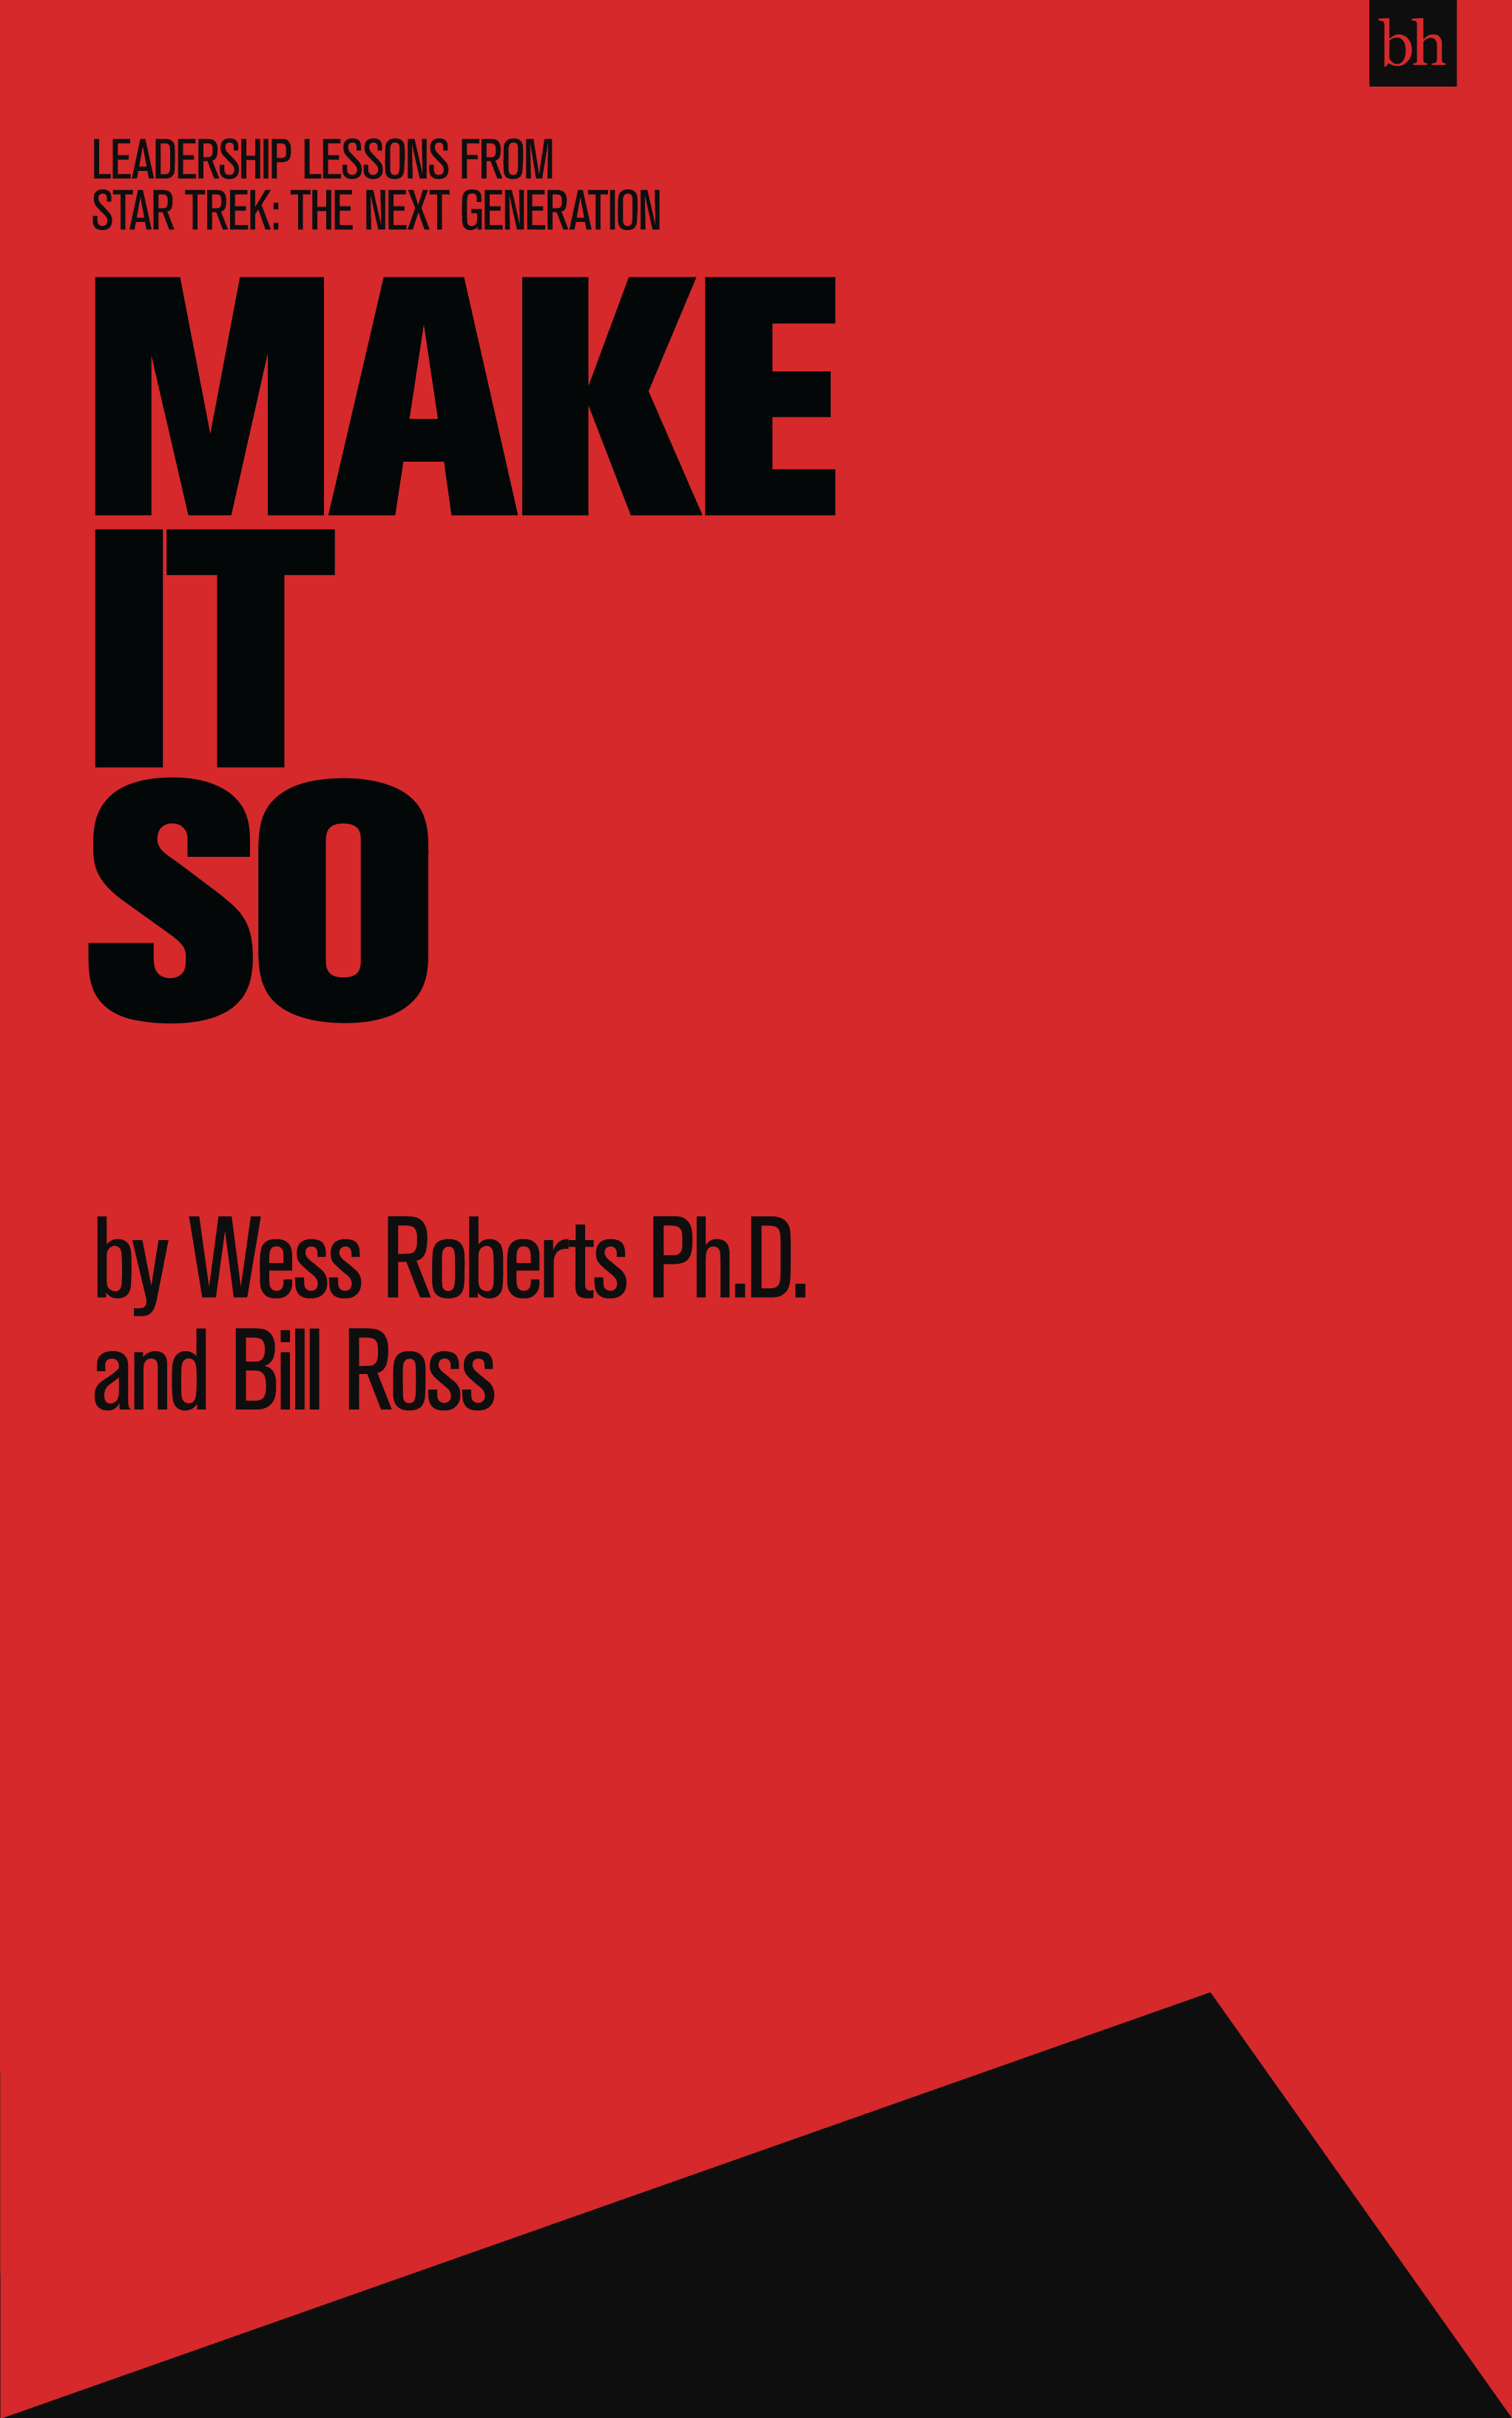 Make It So by Wess Roberts Ph.D. and Bill Ross